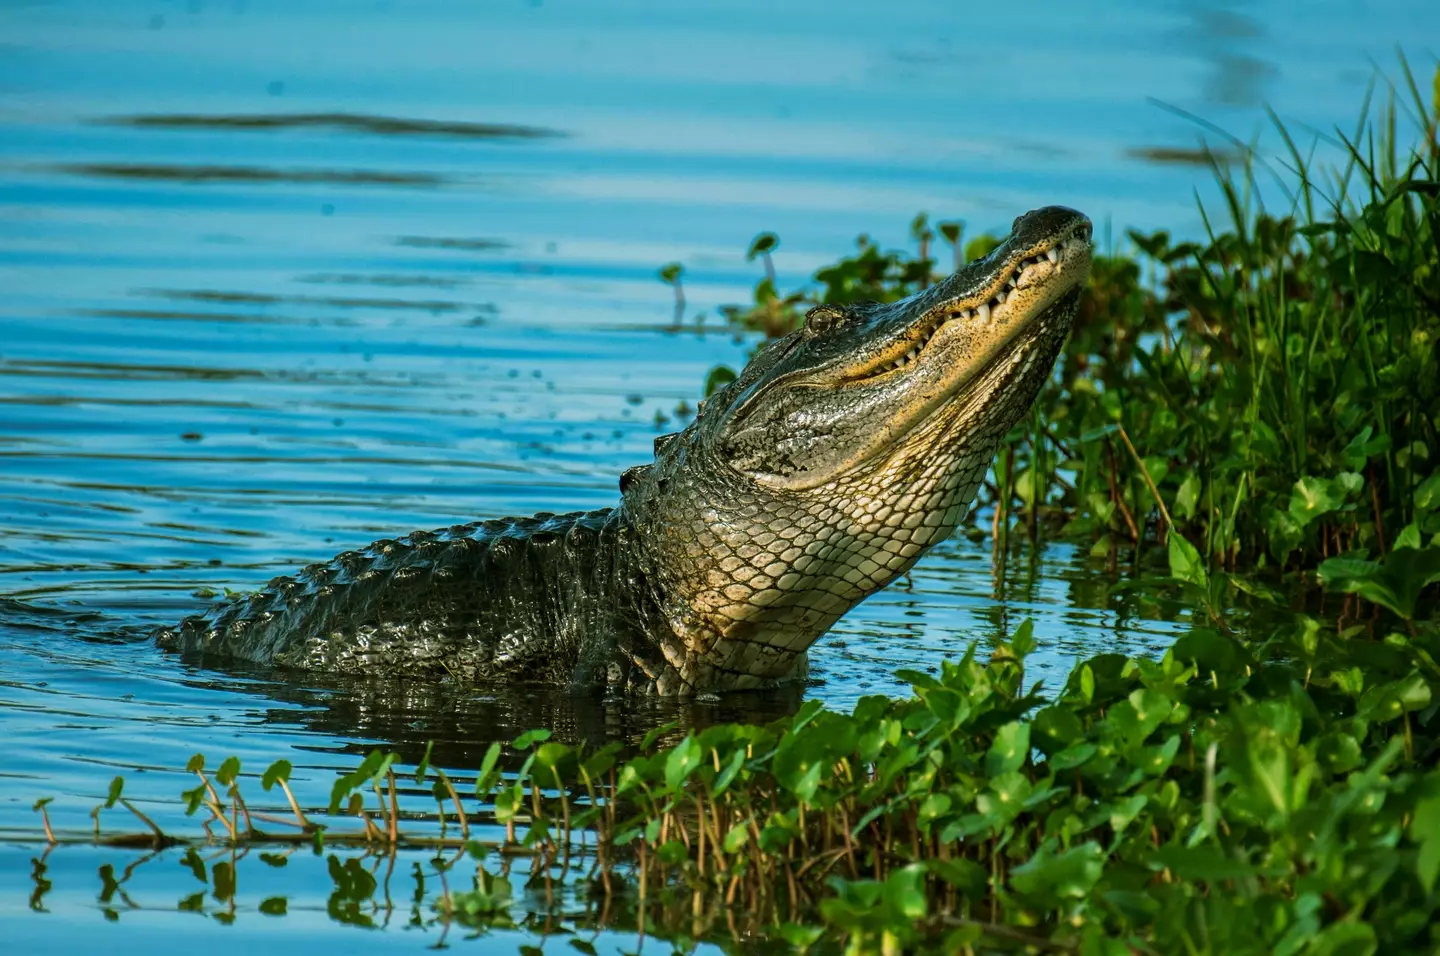 An alligator poking his head out of a body of water. (pexels/Rene Ferrer)